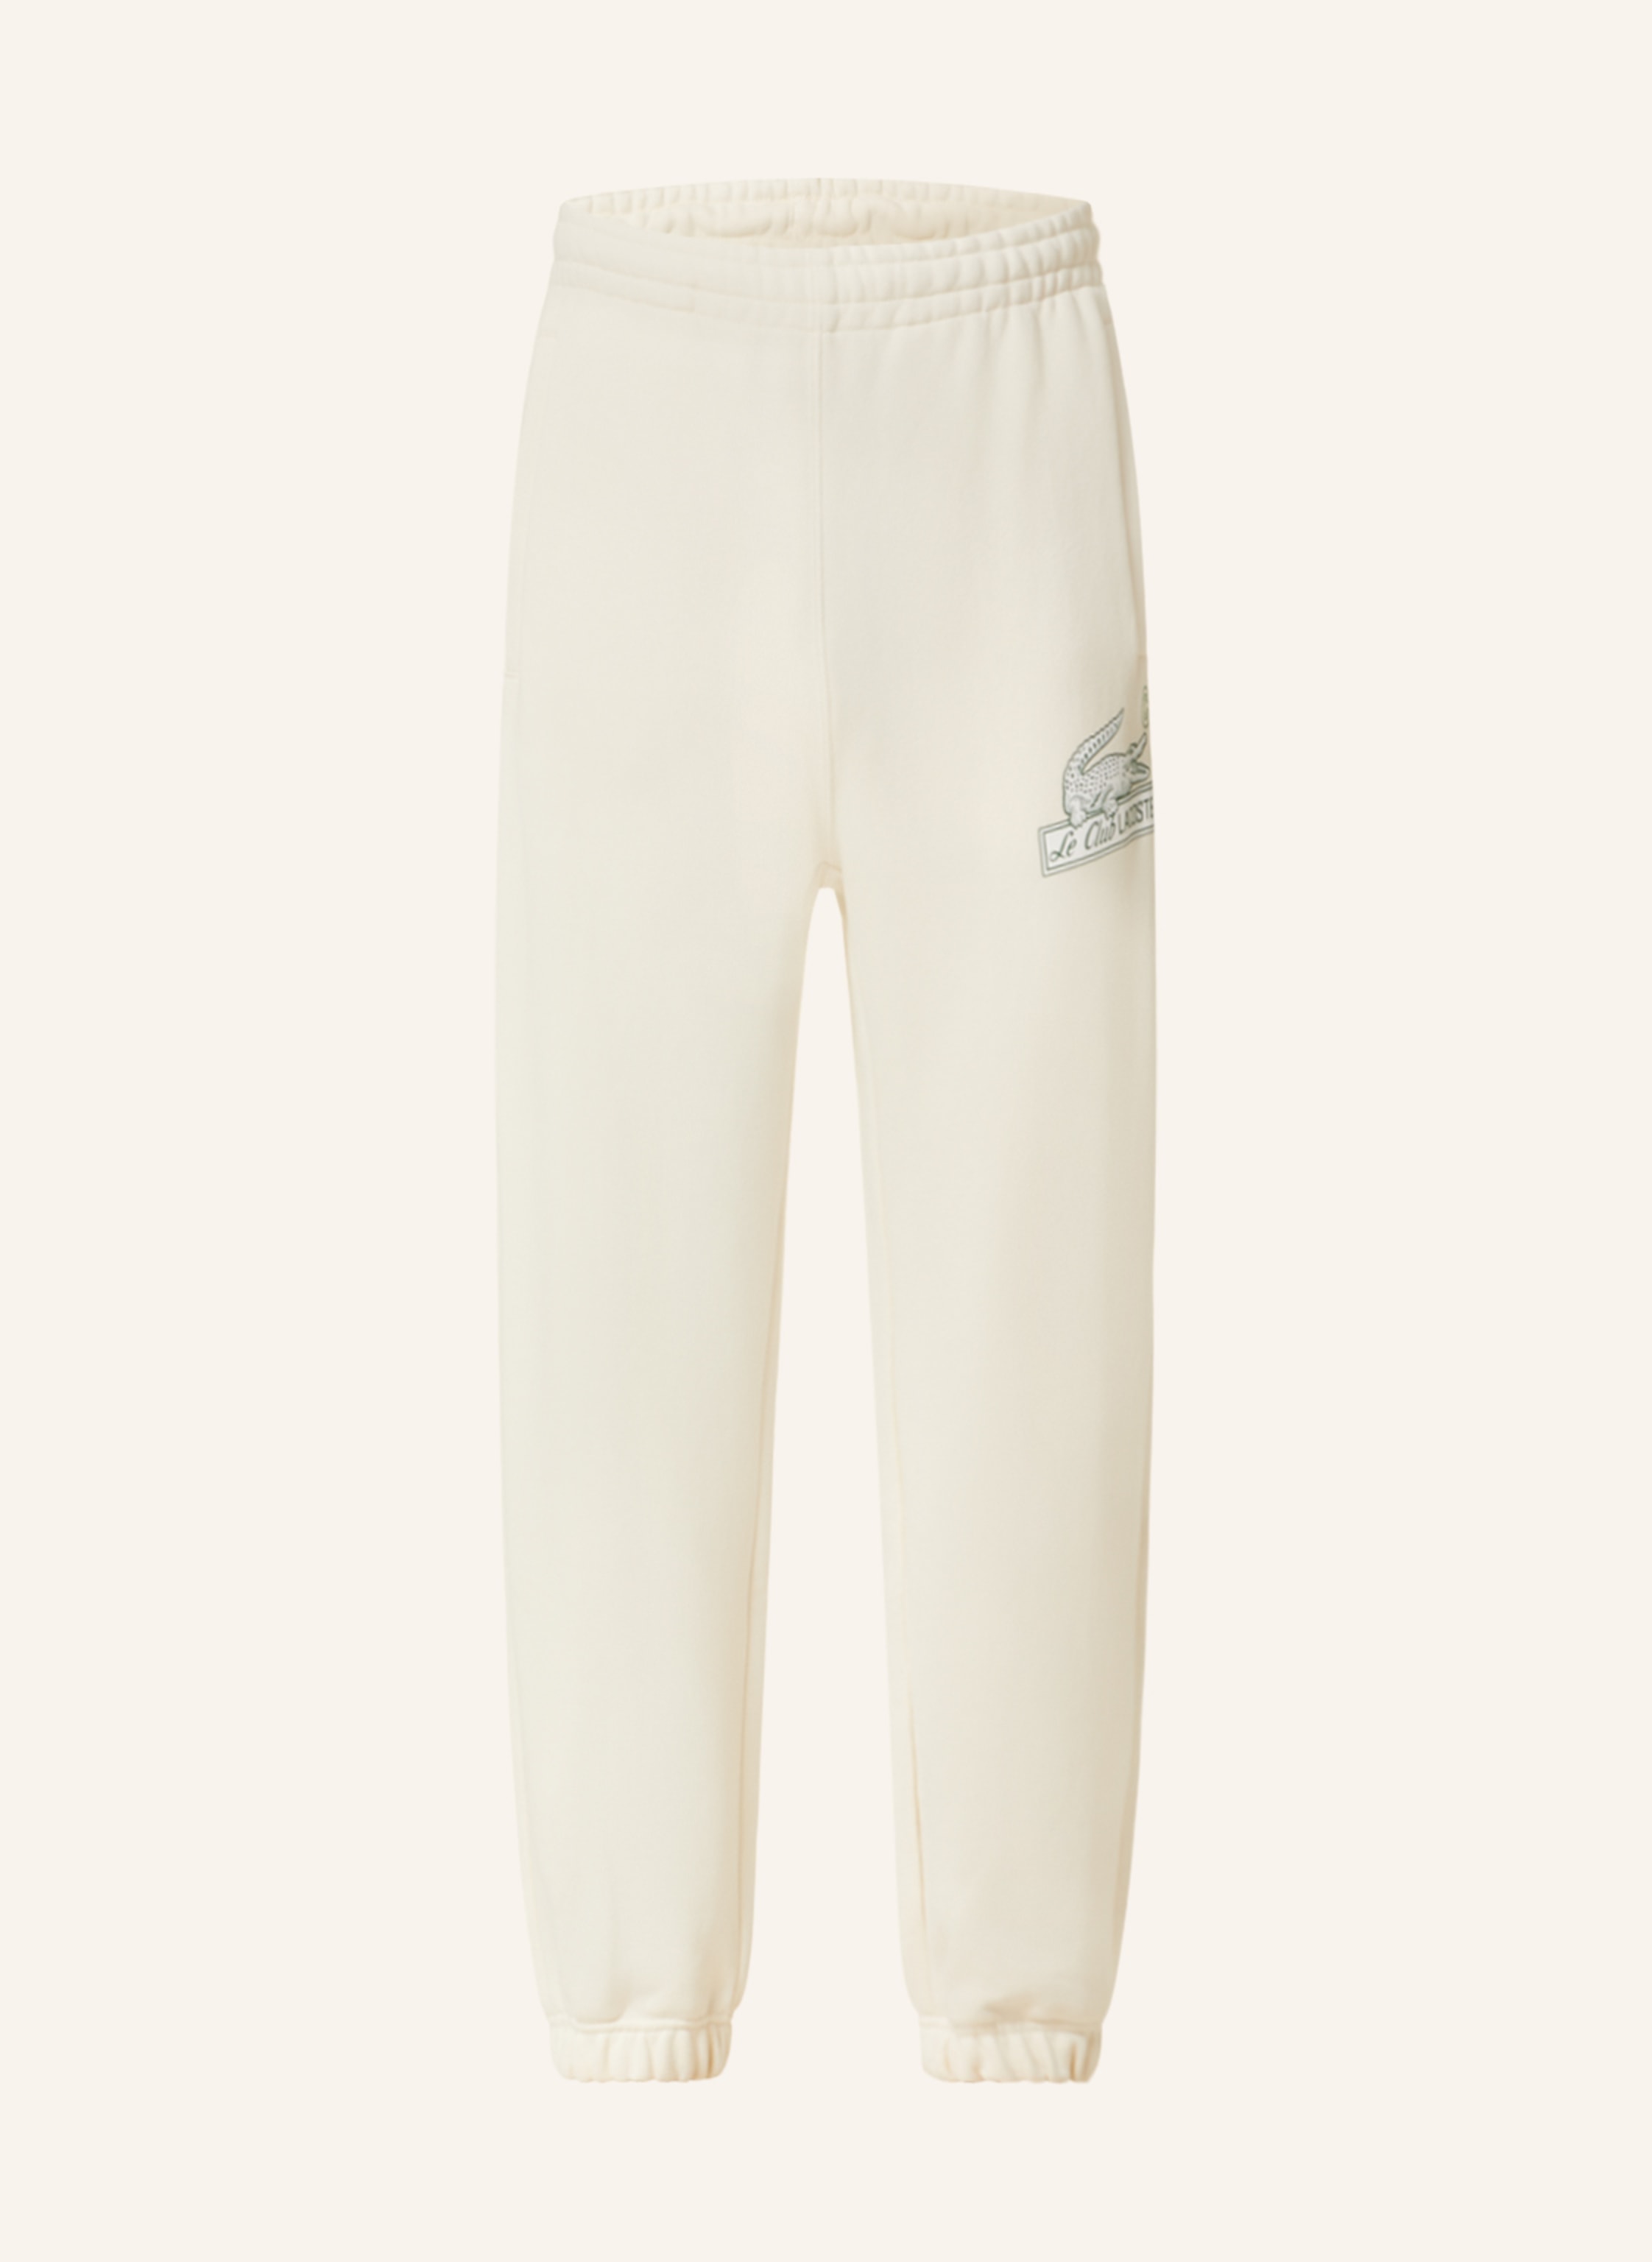 LACOSTE Sweatpants in creme